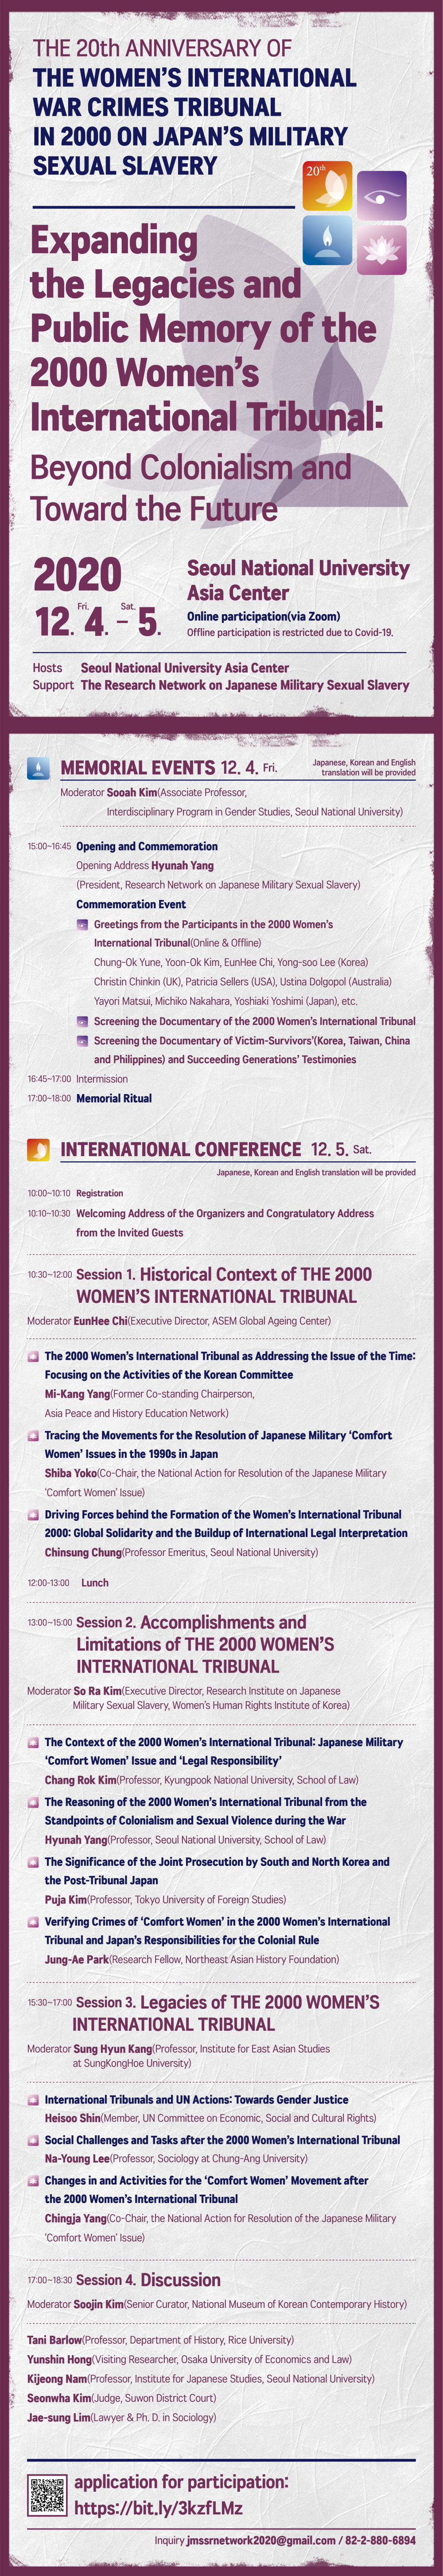 Expanding the Legacies and Public Memory of the 2000 Women’s International Tribunal: Beyond Colonialism and Toward the Future